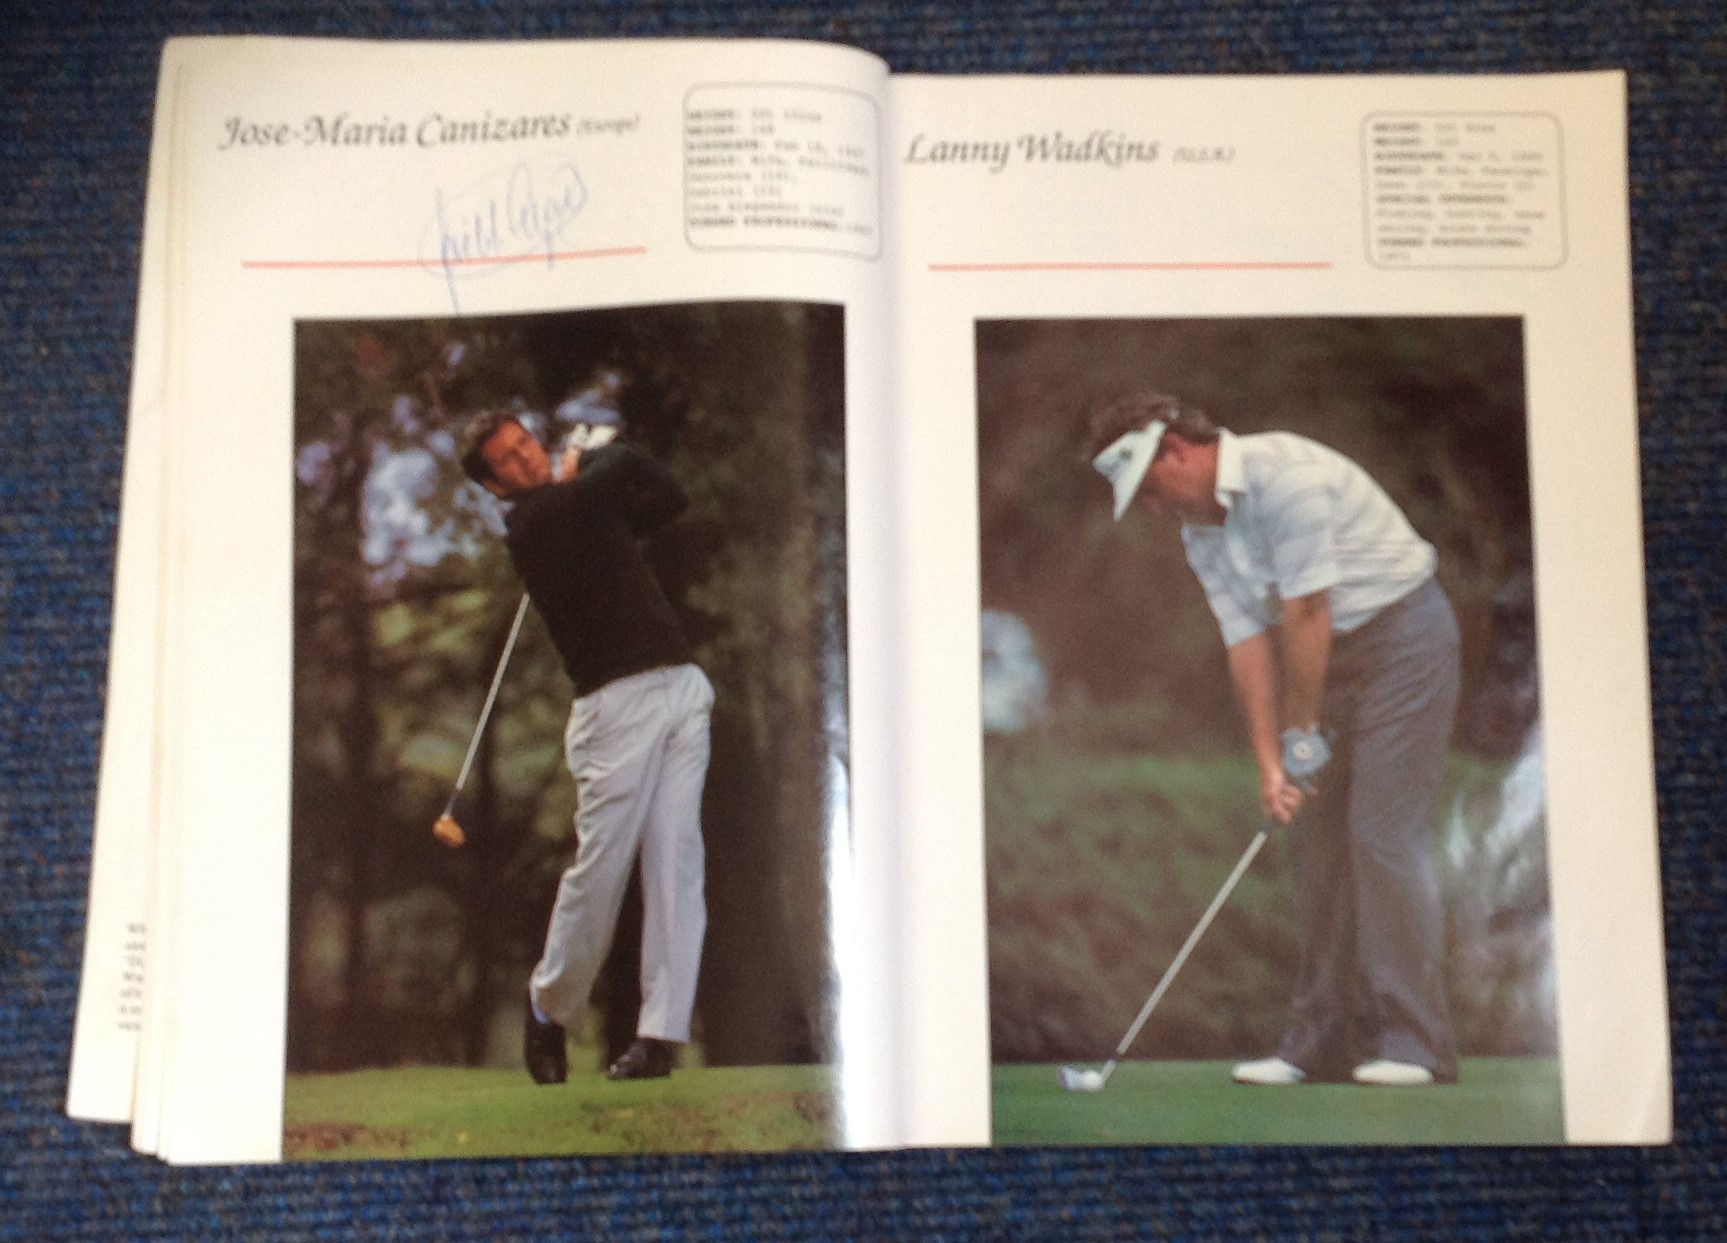 Golf 1989 Ryder Cup signed Golfers News paperback book 12 signatures includes legends of the game - Image 4 of 5